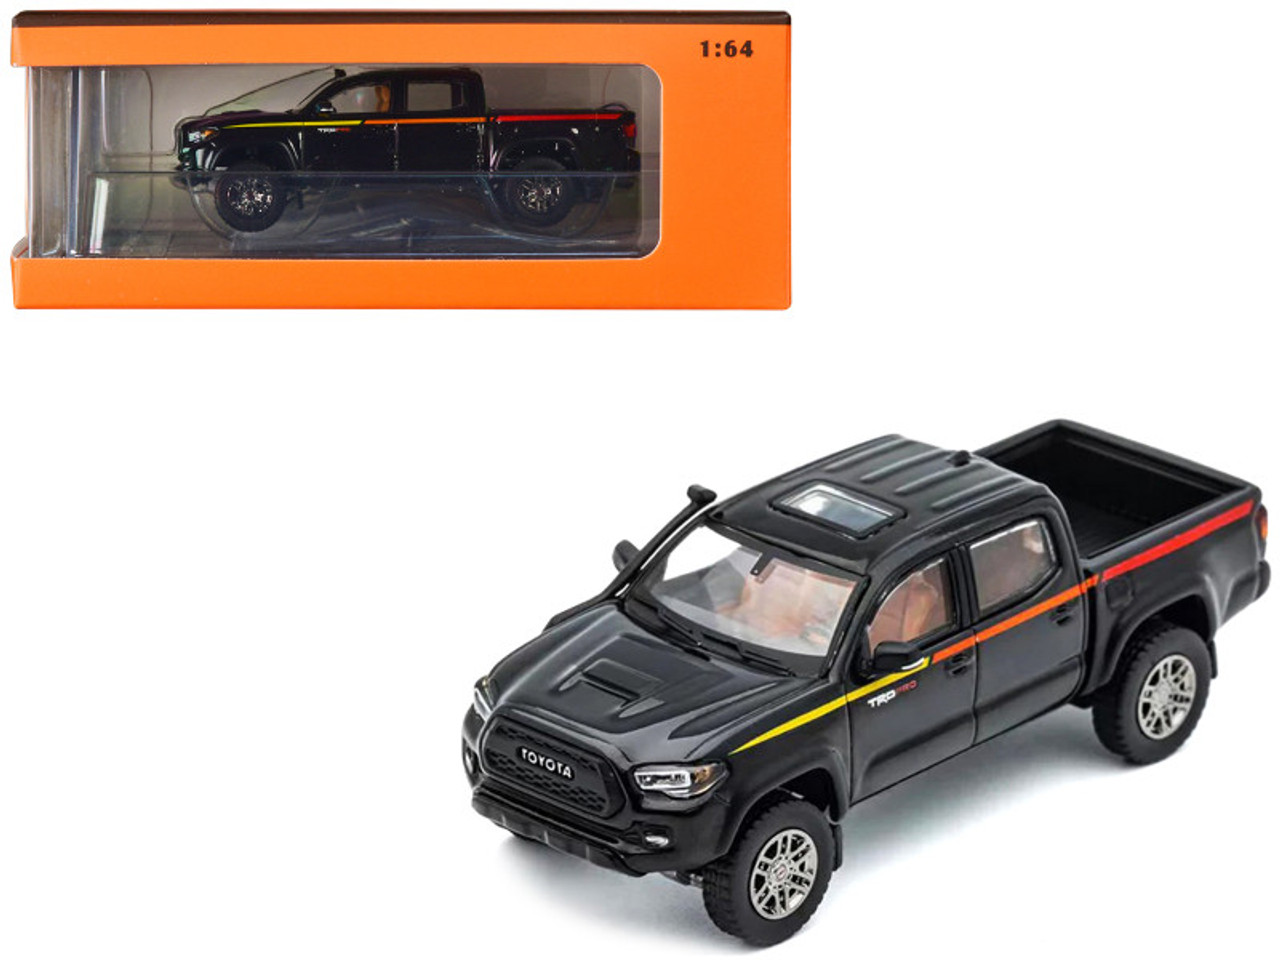 Toyota Tacoma TRD PRO Pickup Truck Black with Stripes 1/64 Diecast Model Car by GCD